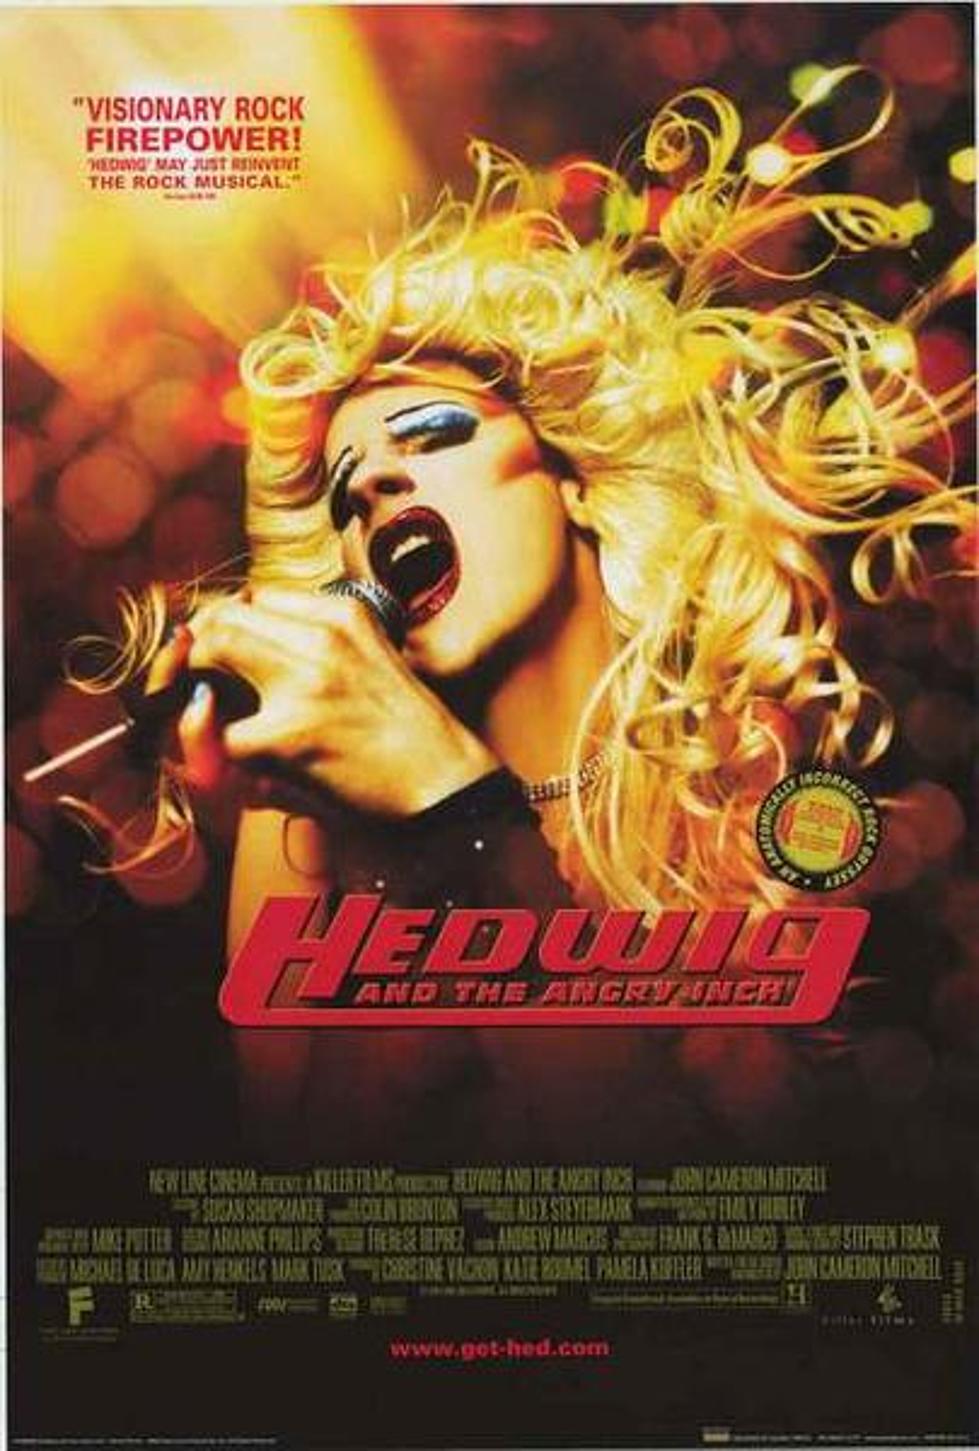 Alamo Drafthouse to Screen Rock Opera ‘Hedwig And the Angry Inch’